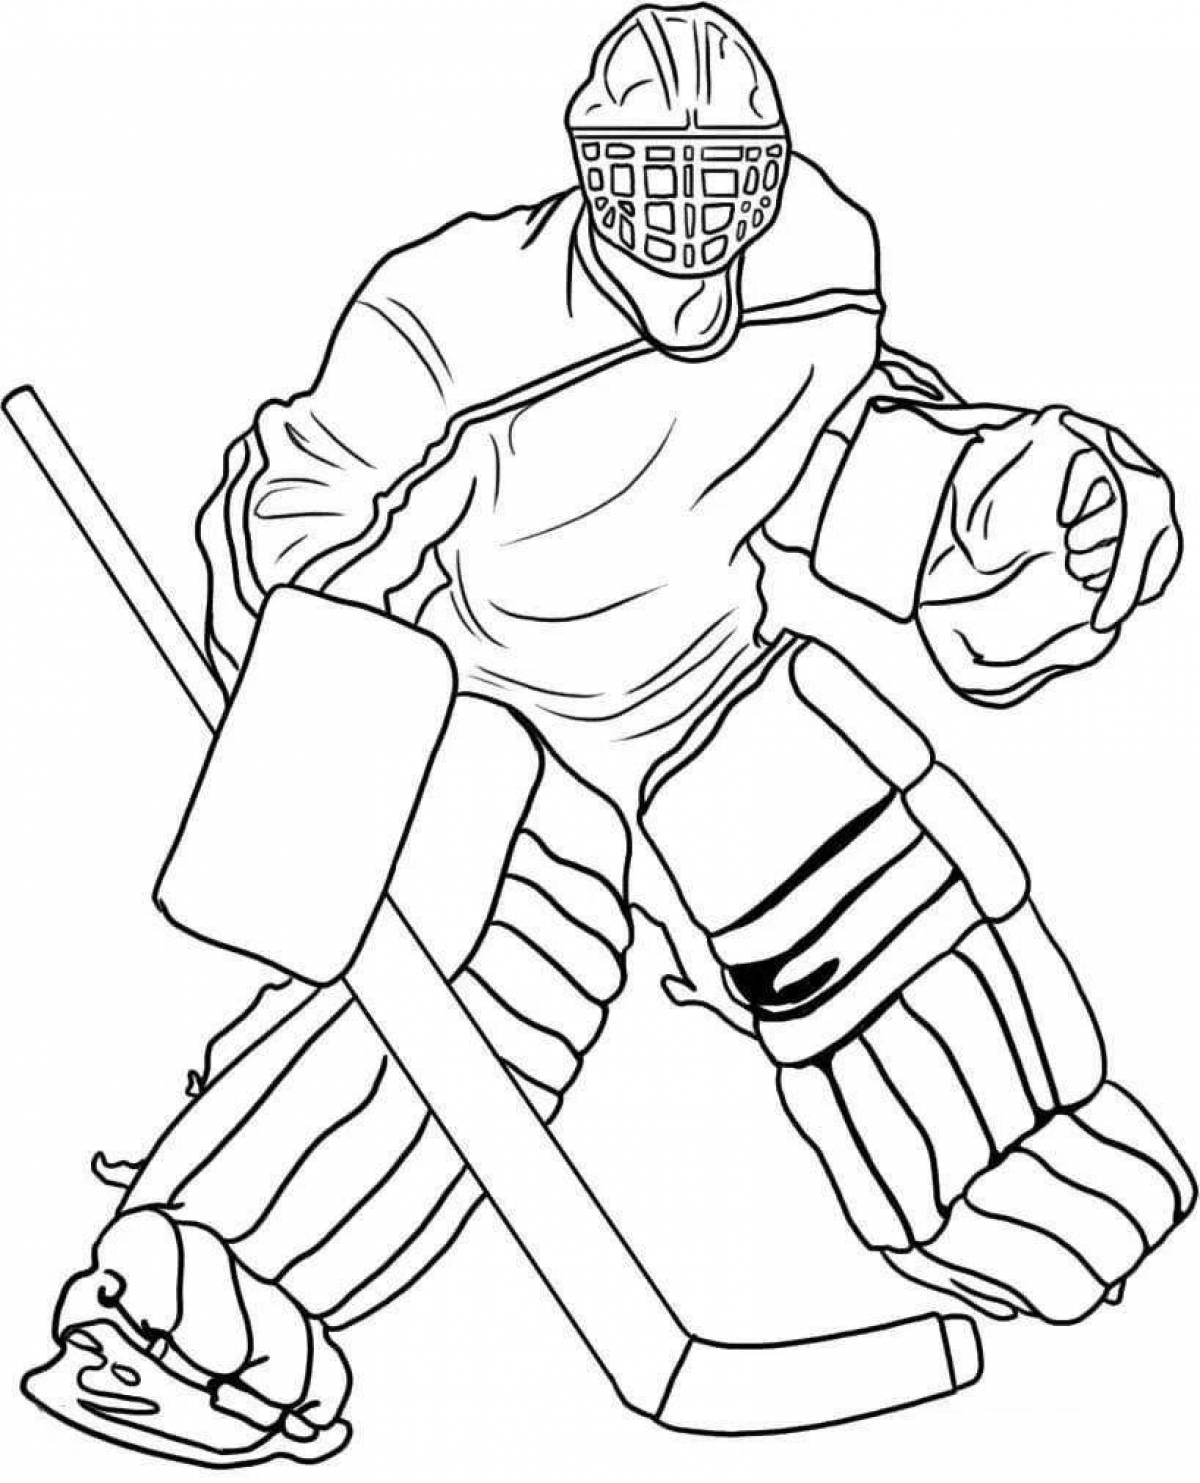 Coloring page stylish goalkeeper